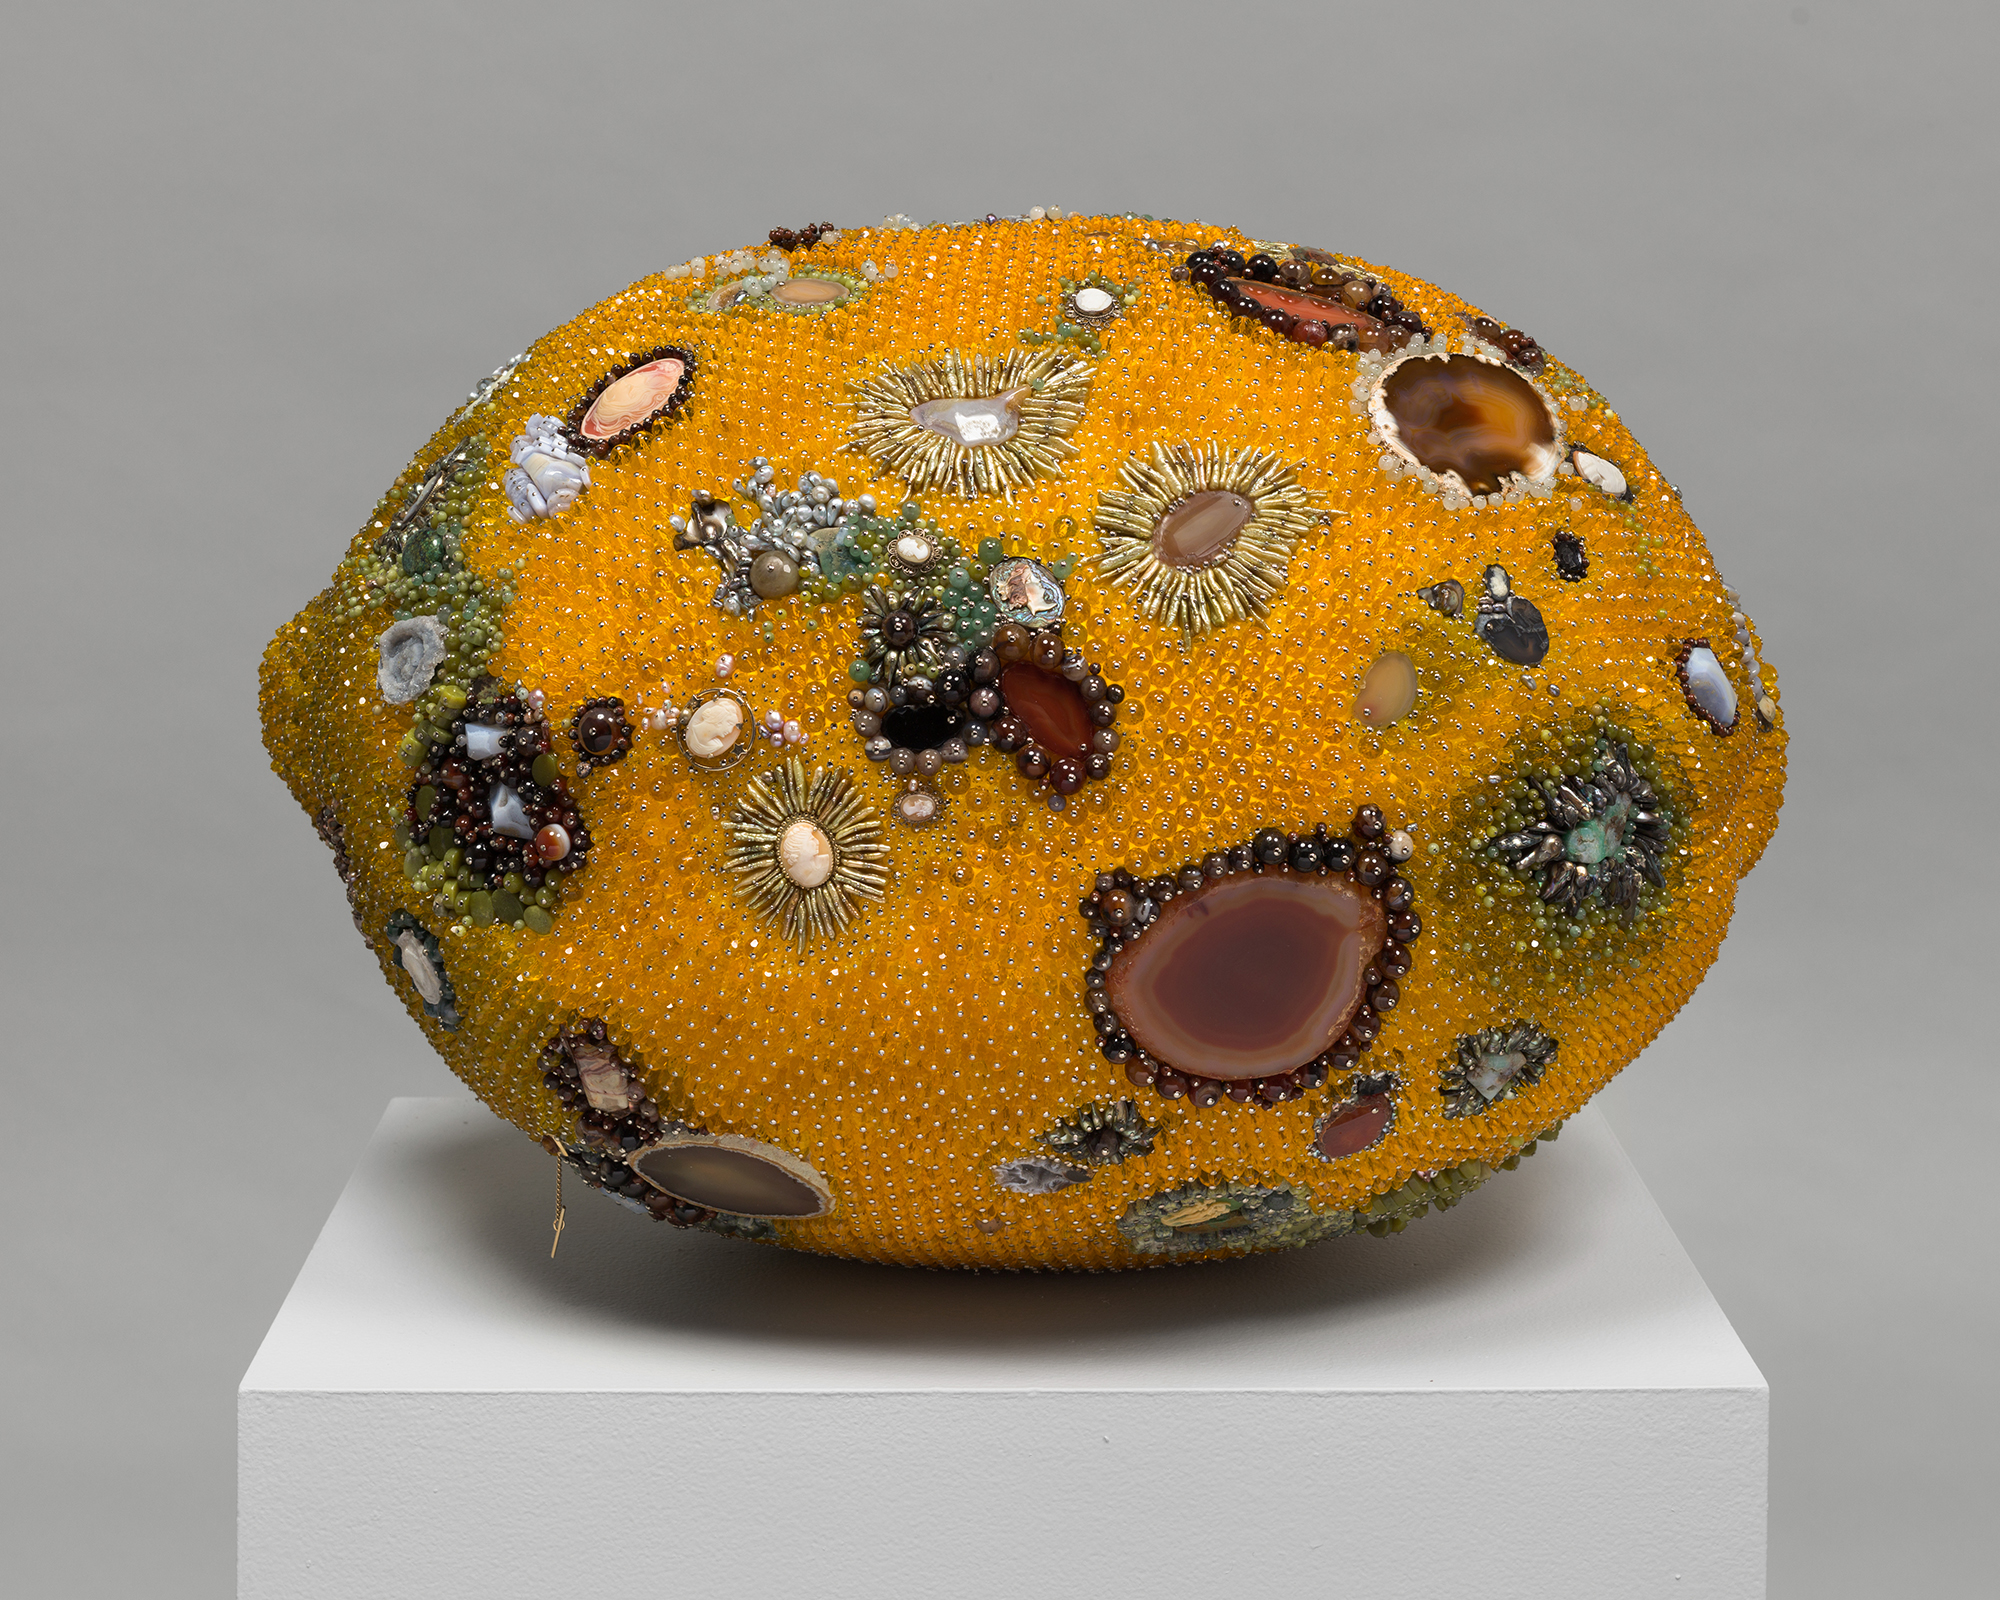 Sculpture of a lemon with molding patterns on it made of gems and rocks